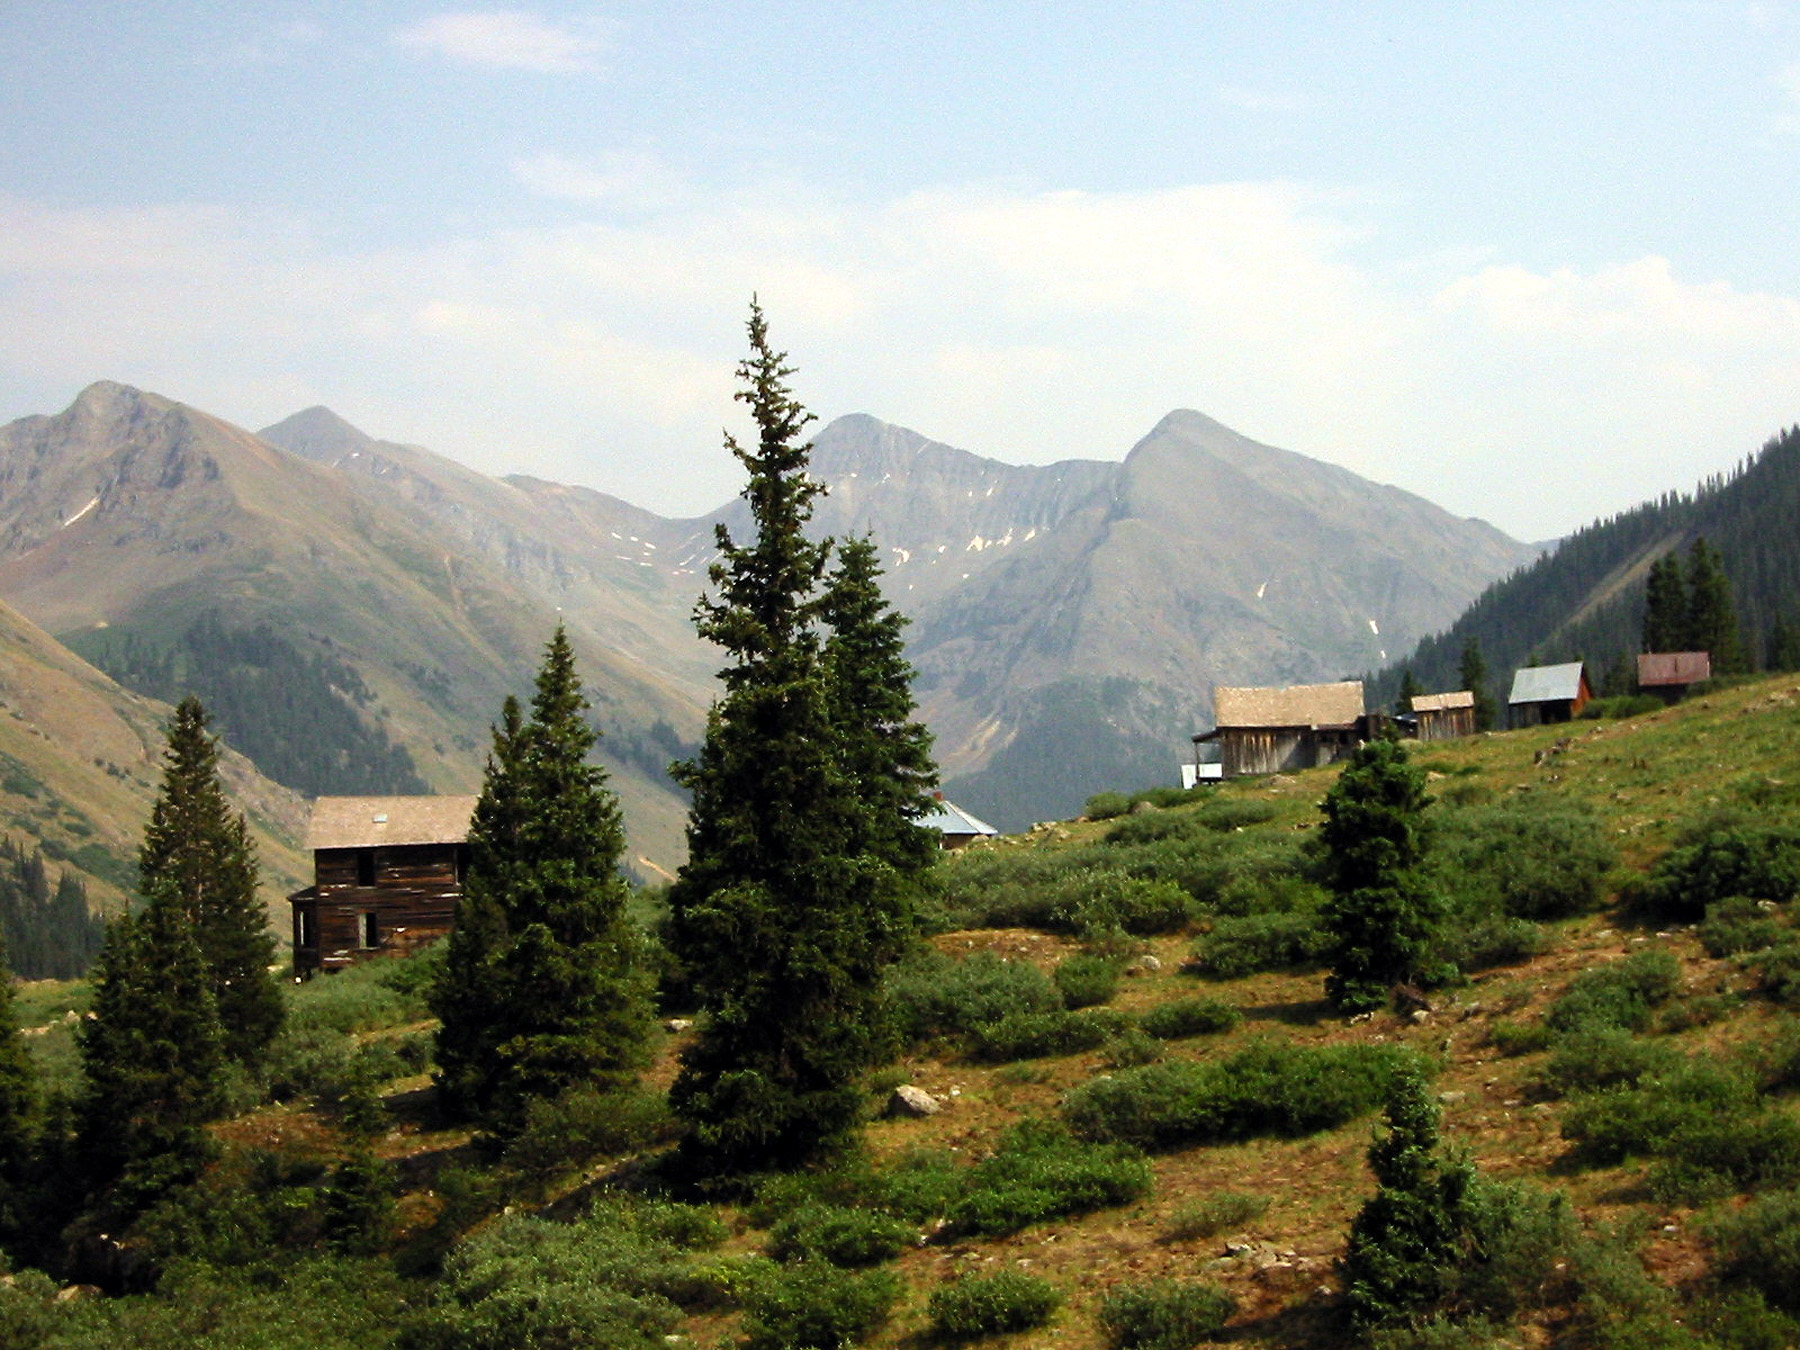 Overview of the Animas Forks townsite in 2004.